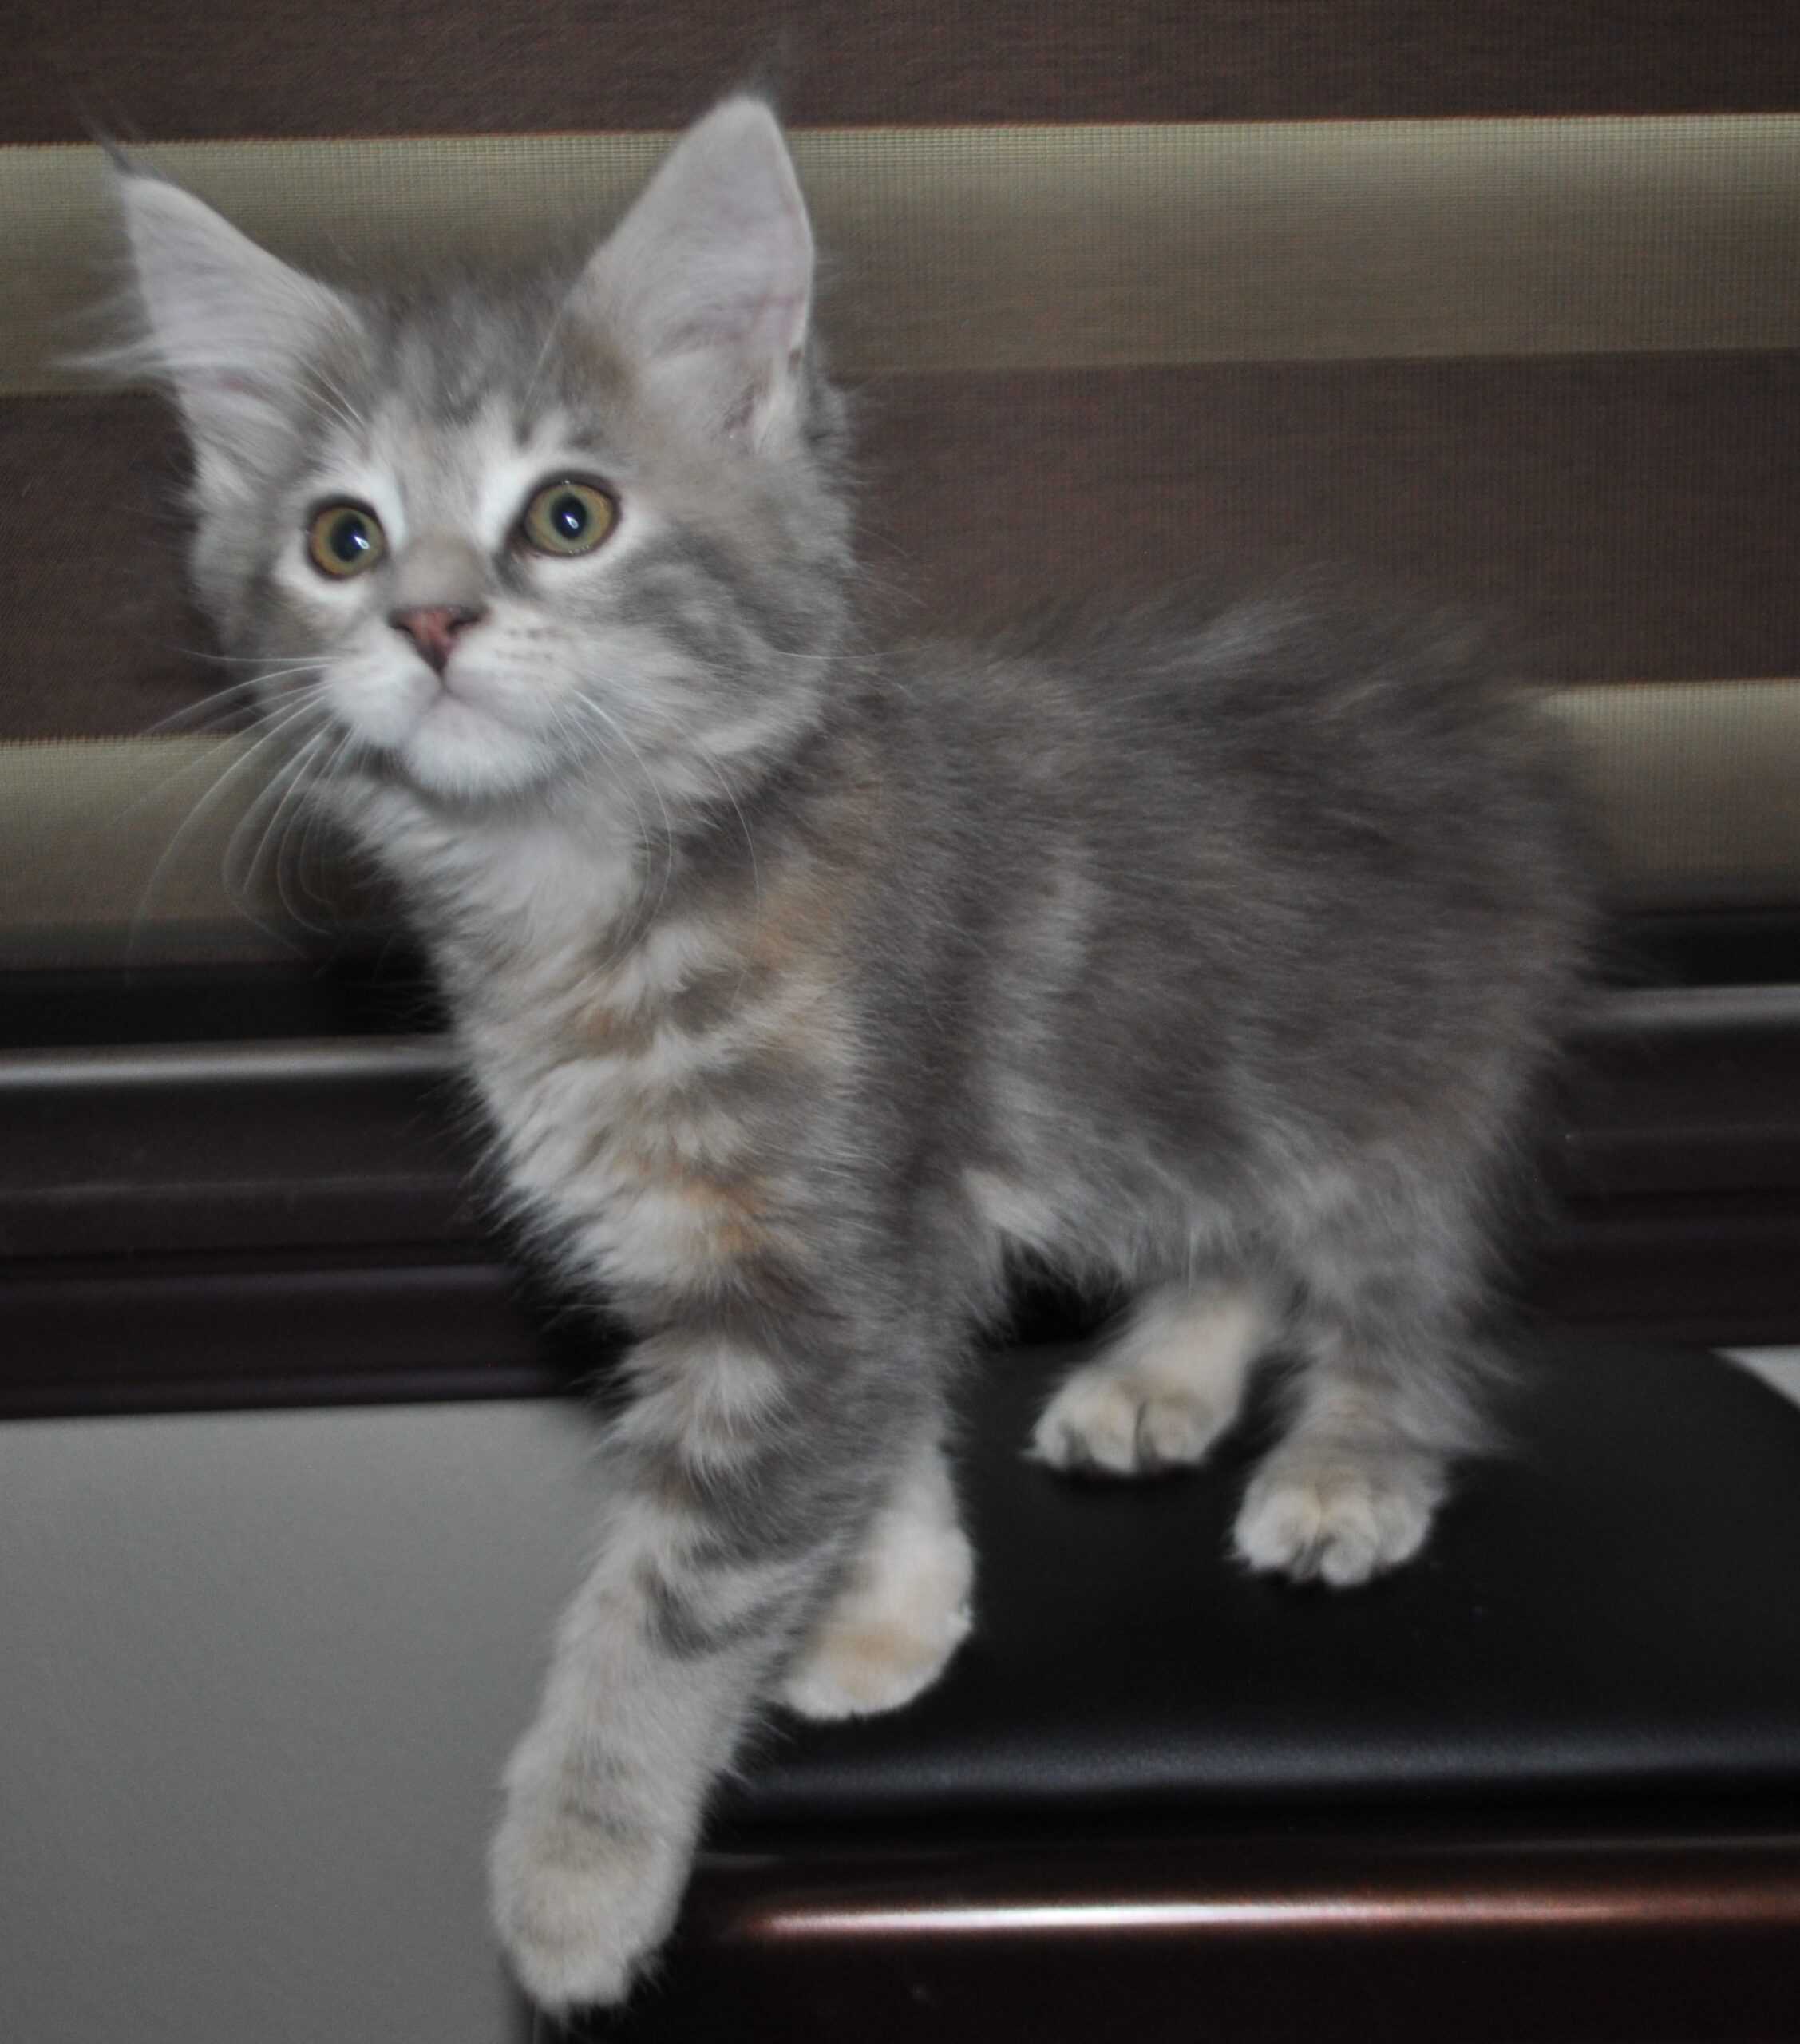 Maine Coon Kittens - Purebred Male and Female | PetClassifieds.com